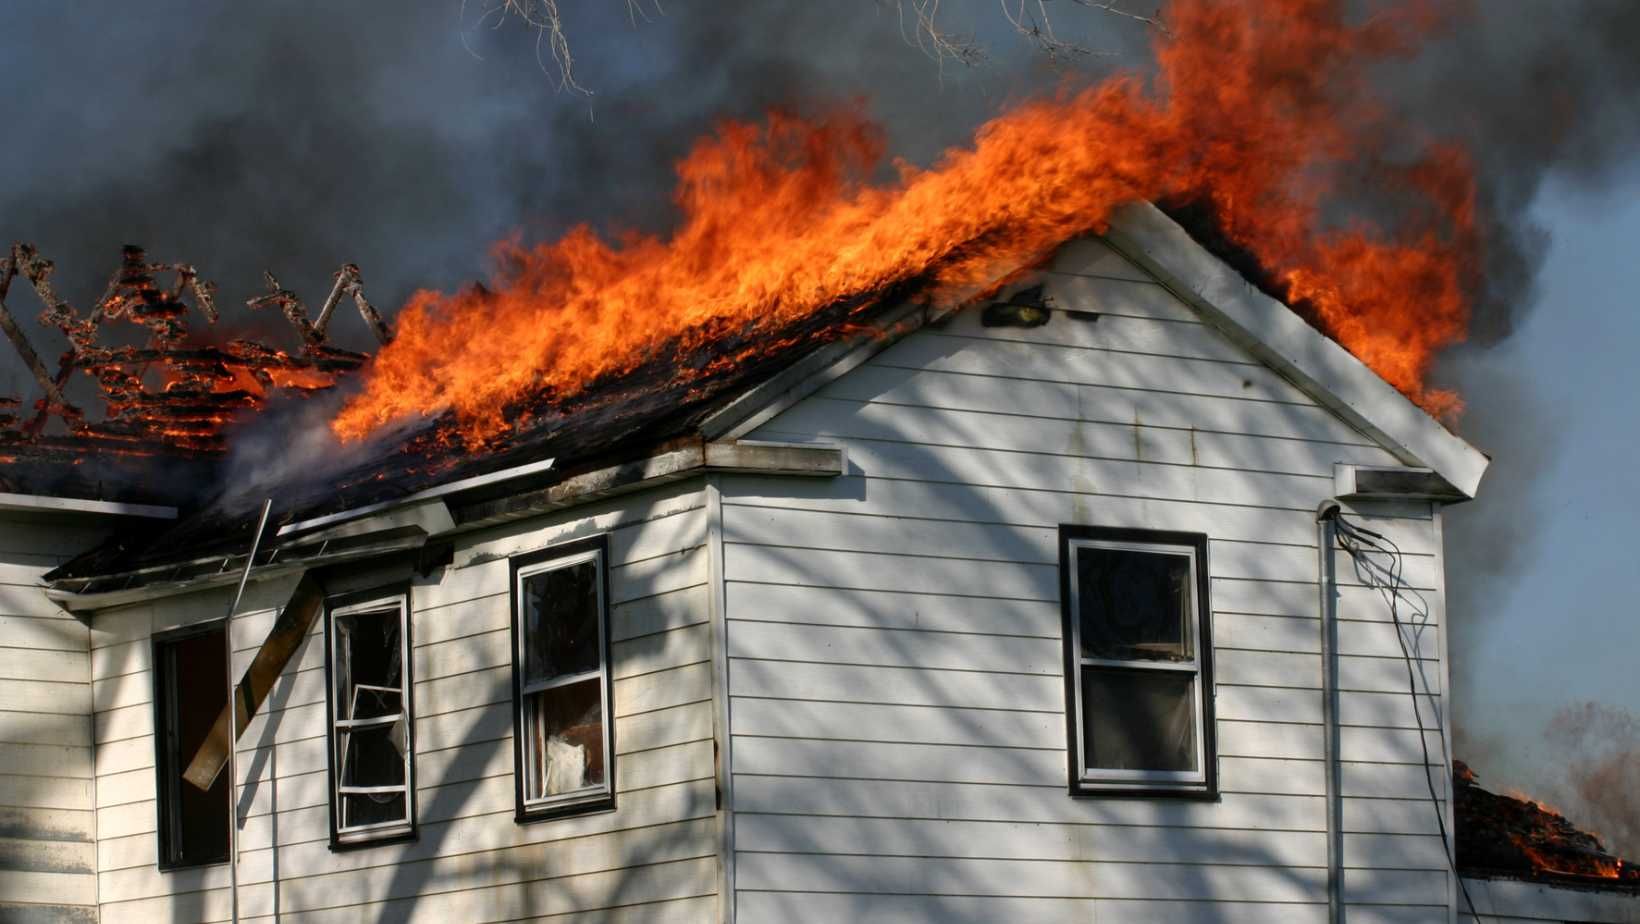 Ensuring Financial Safety The Vital Role of Insurance in Fire Damage Recovery